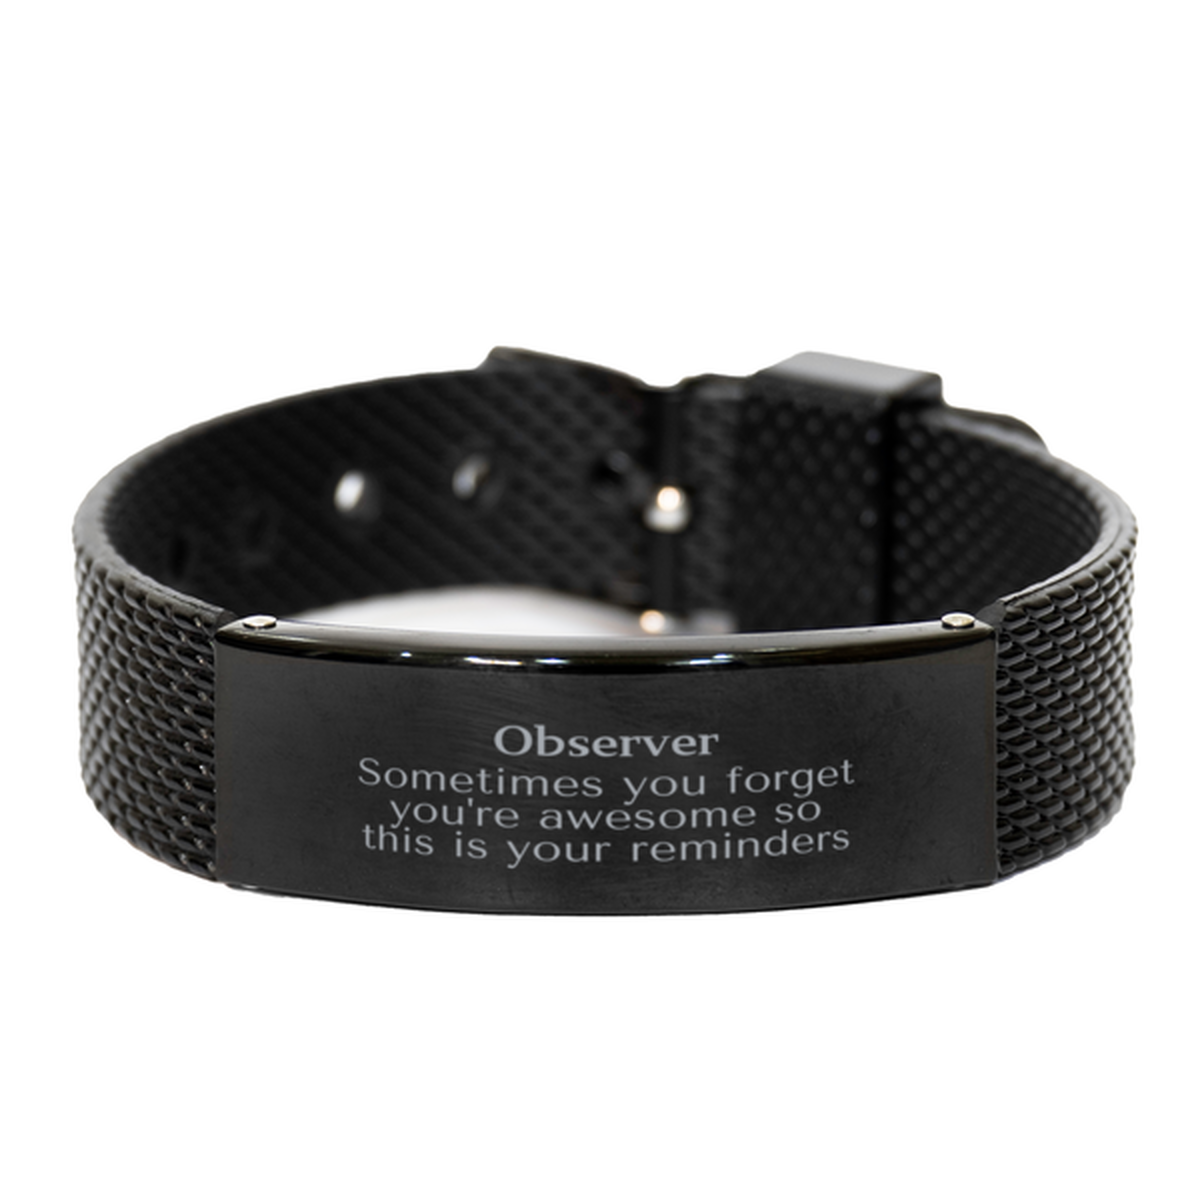 Sentimental Observer Black Shark Mesh Bracelet, Observer Sometimes you forget you're awesome so this is your reminders, Graduation Christmas Birthday Gifts for Observer, Men, Women, Coworkers